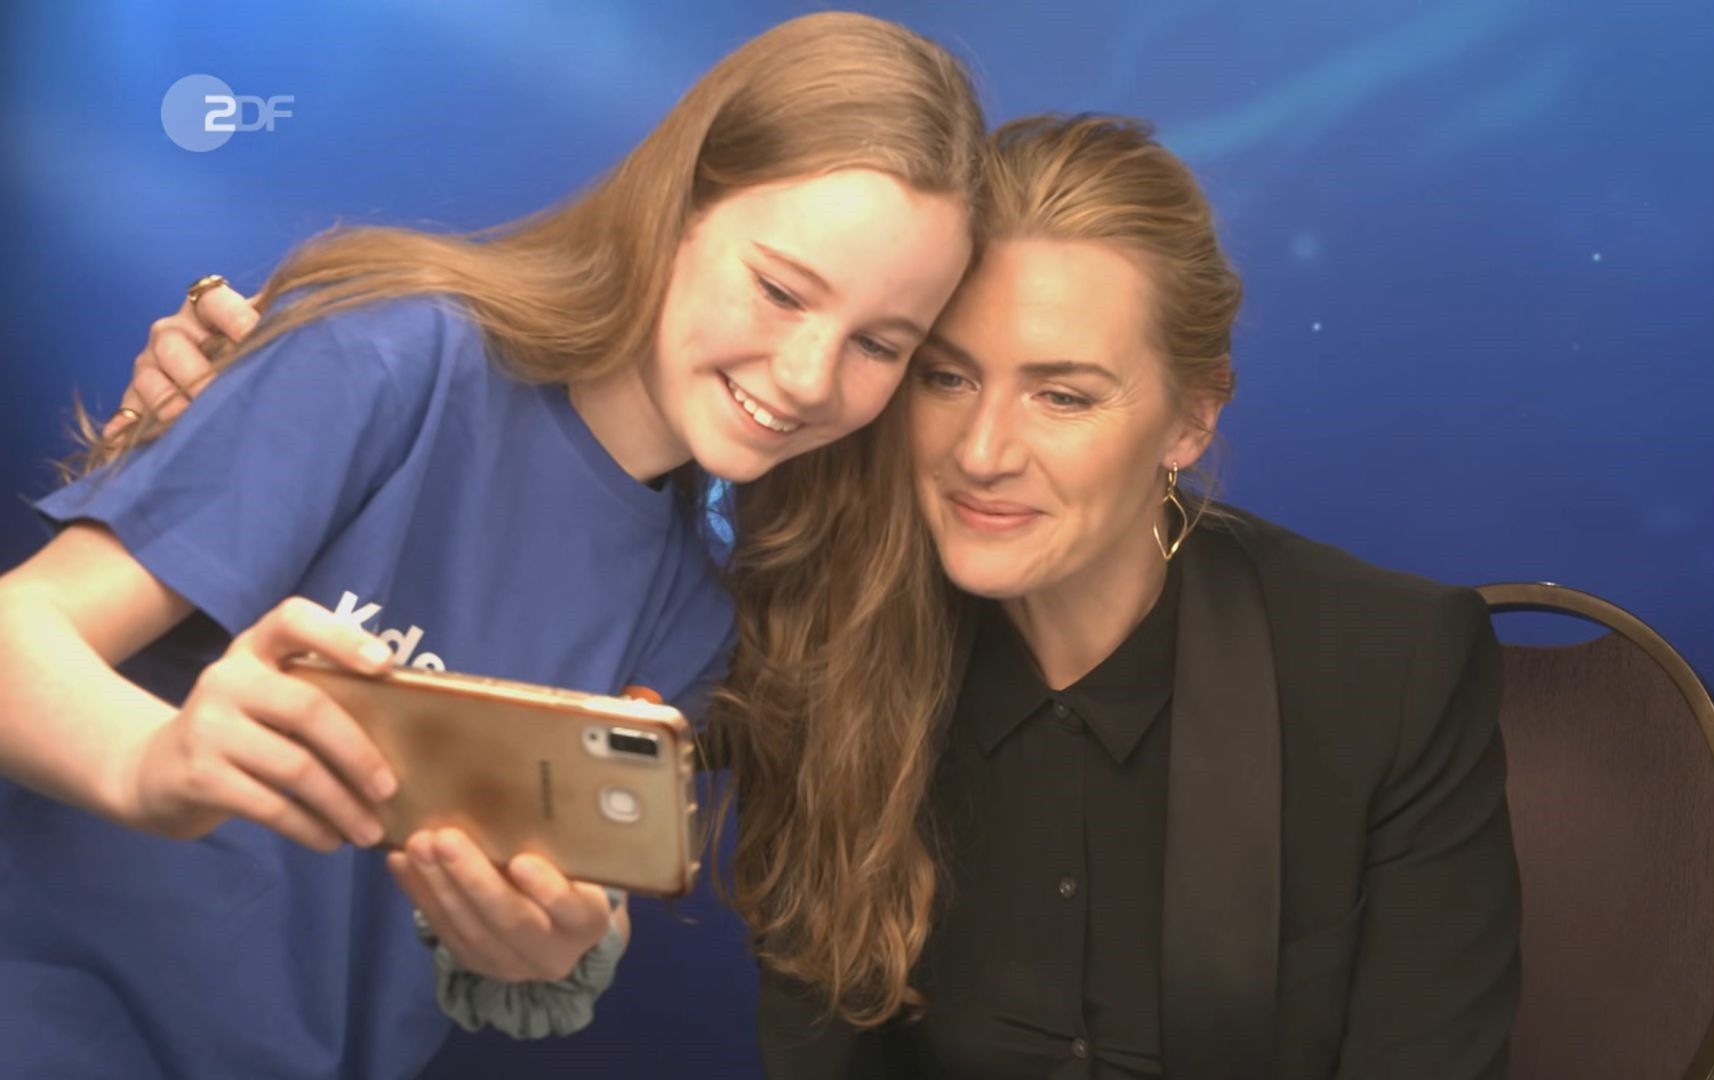 'You've got this': Kate Winslet gives advice to young interviewer in viral video